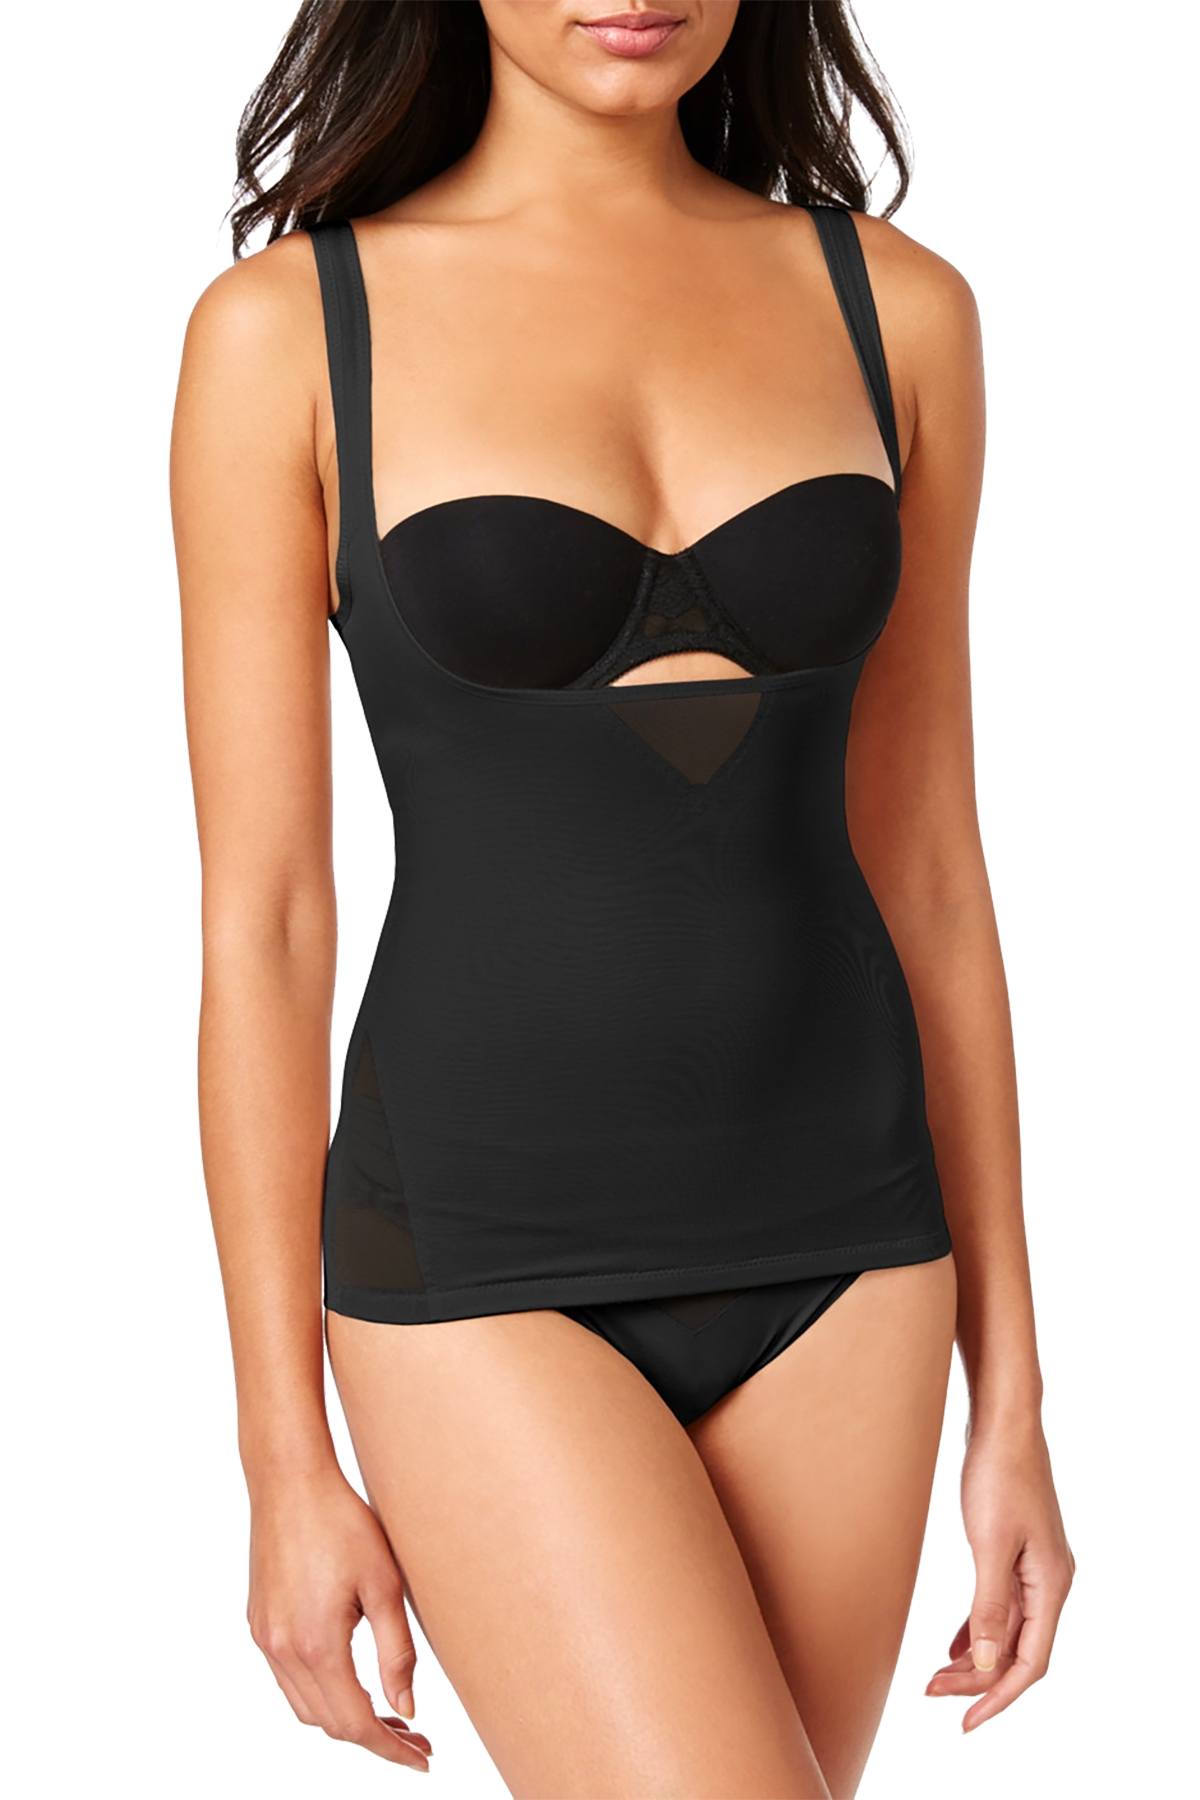 Miraclesuit Black Sheer Extra Firm Tummy Control Step In Torsette